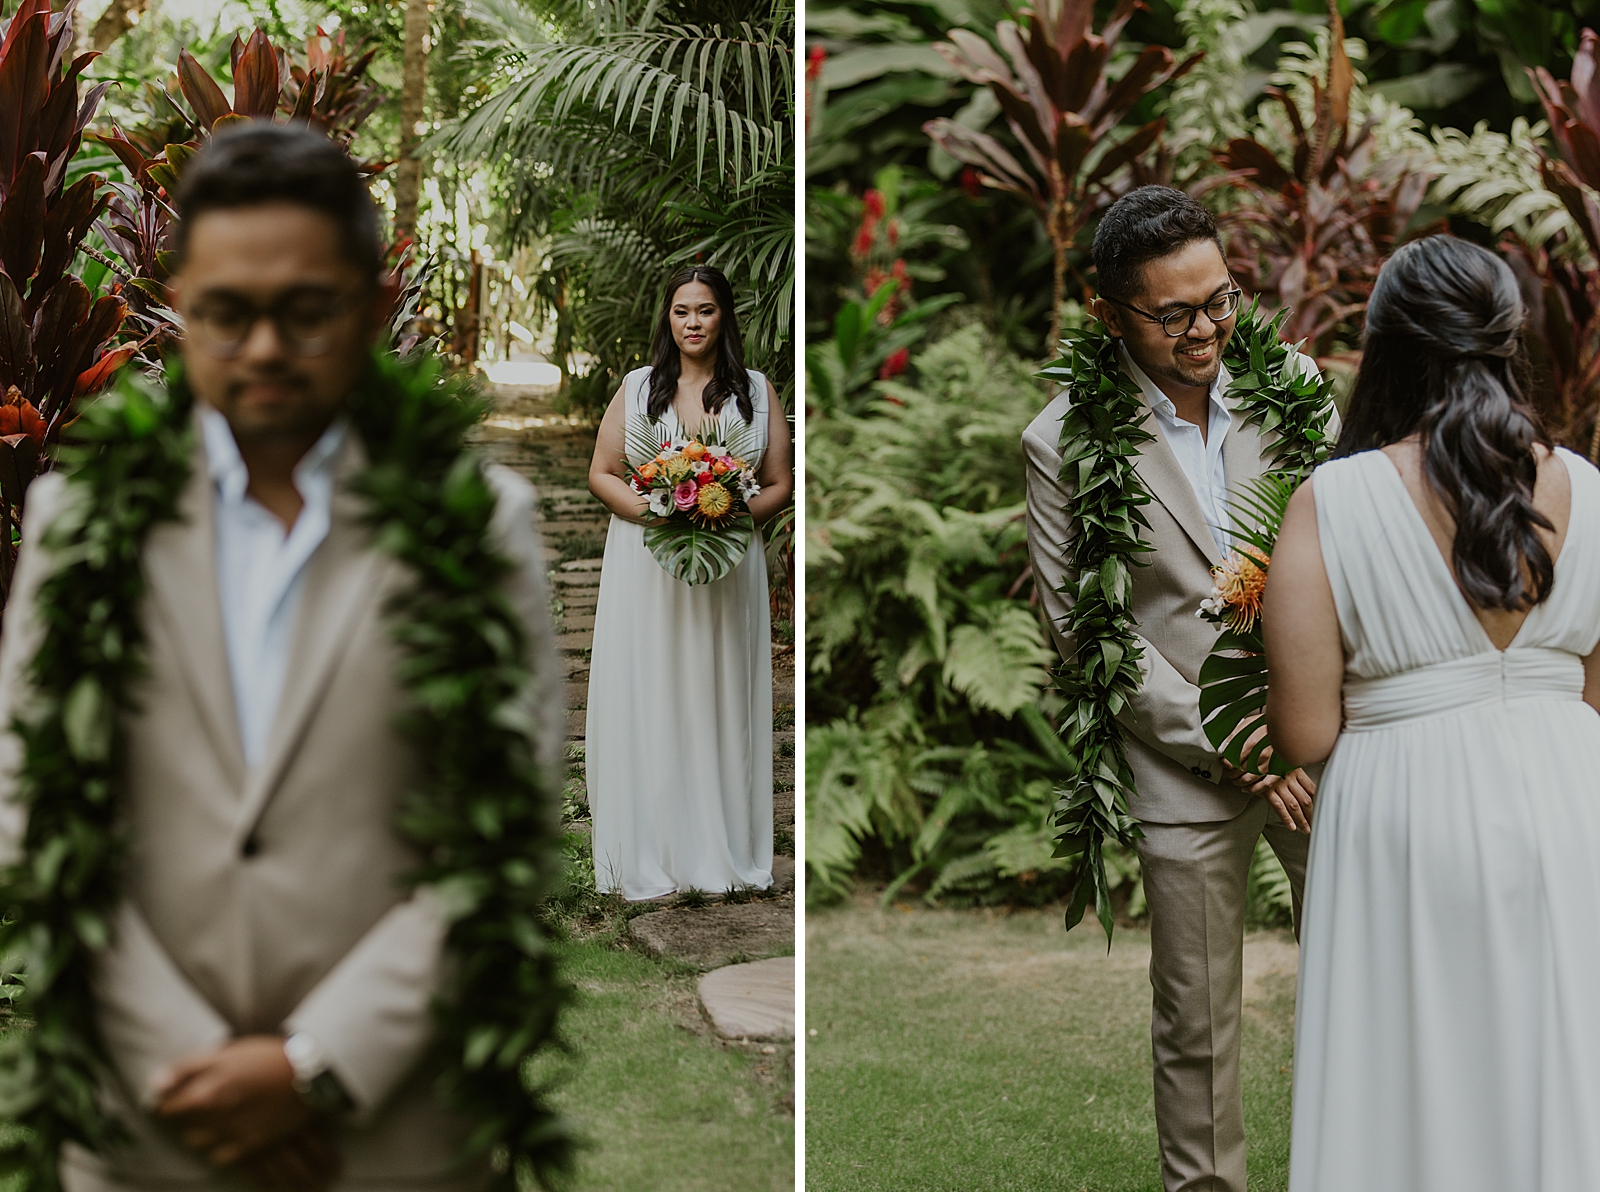 Bride approaching Groom surrounded by tropical greenery for First Look